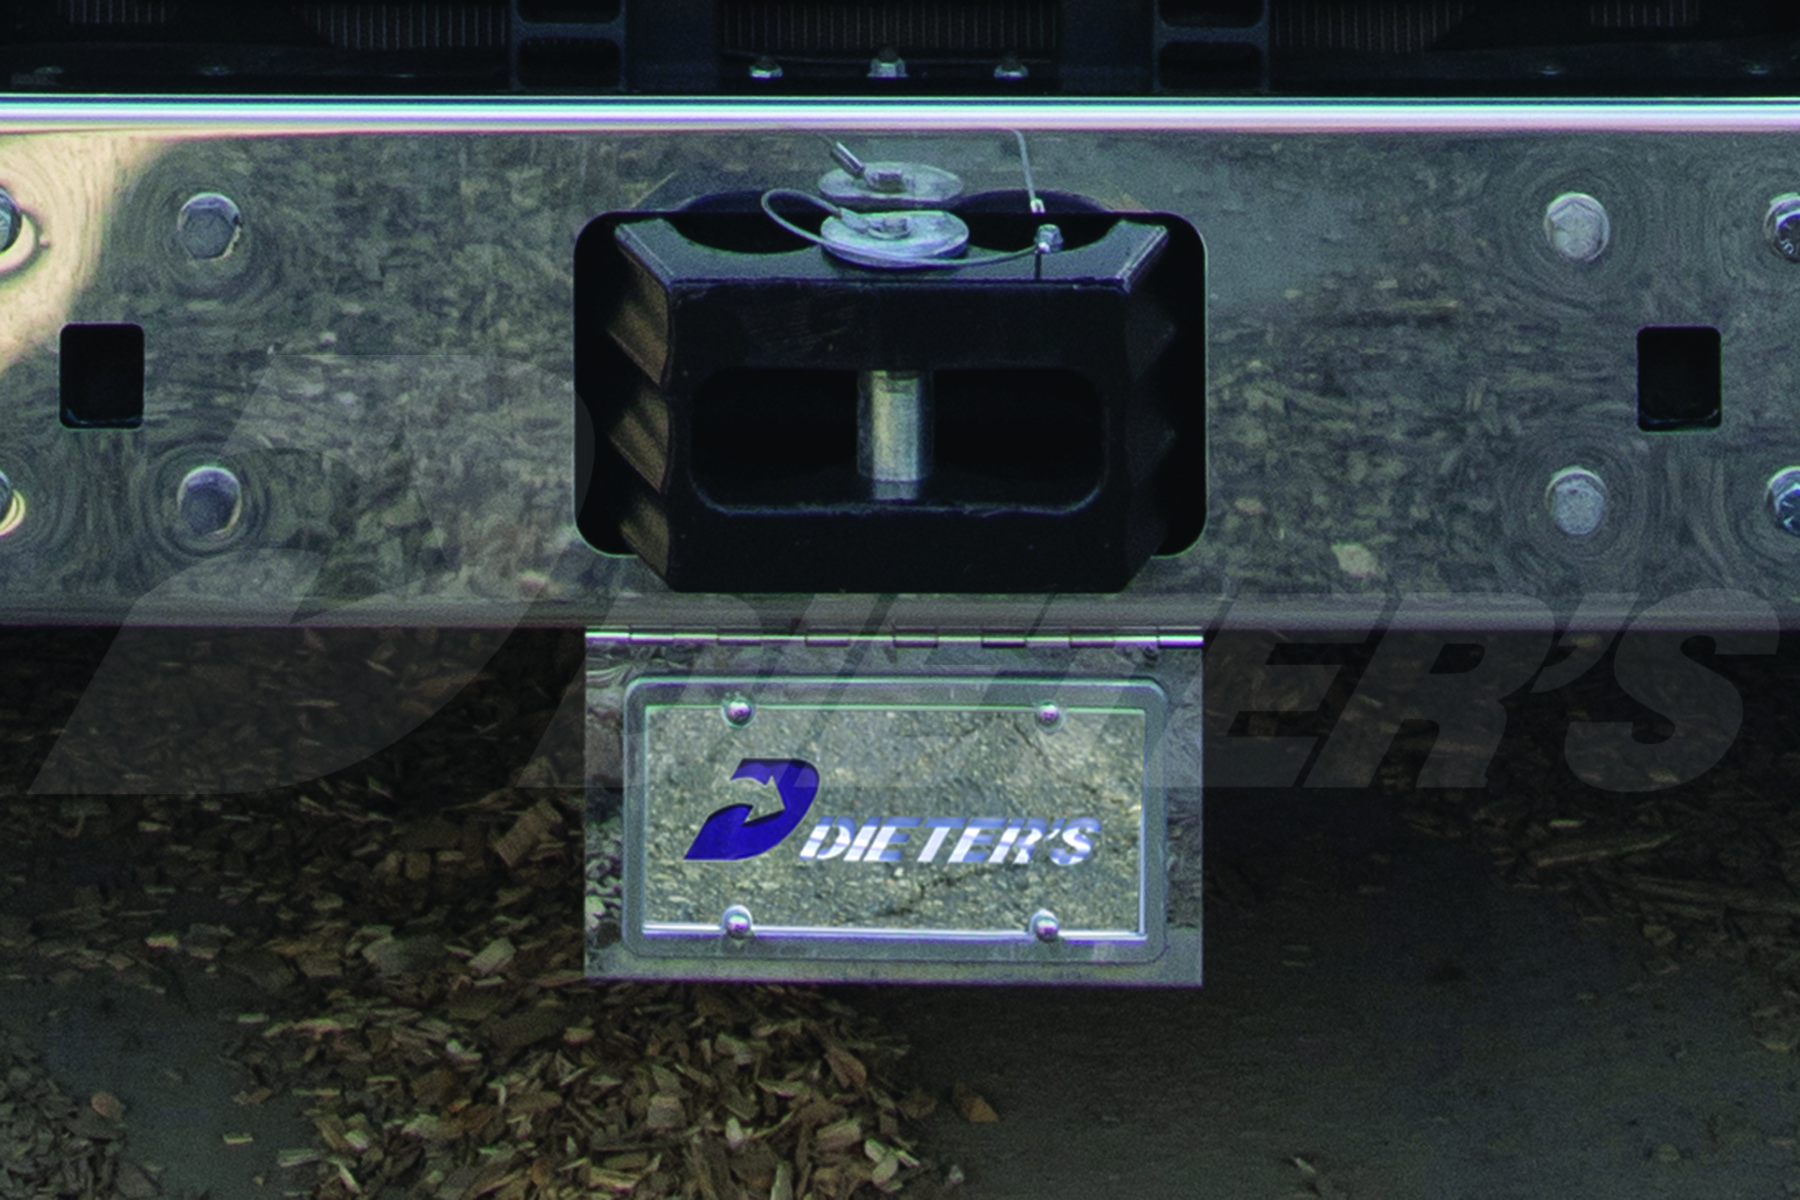 Under Bumper License Plate/Swing Plate image